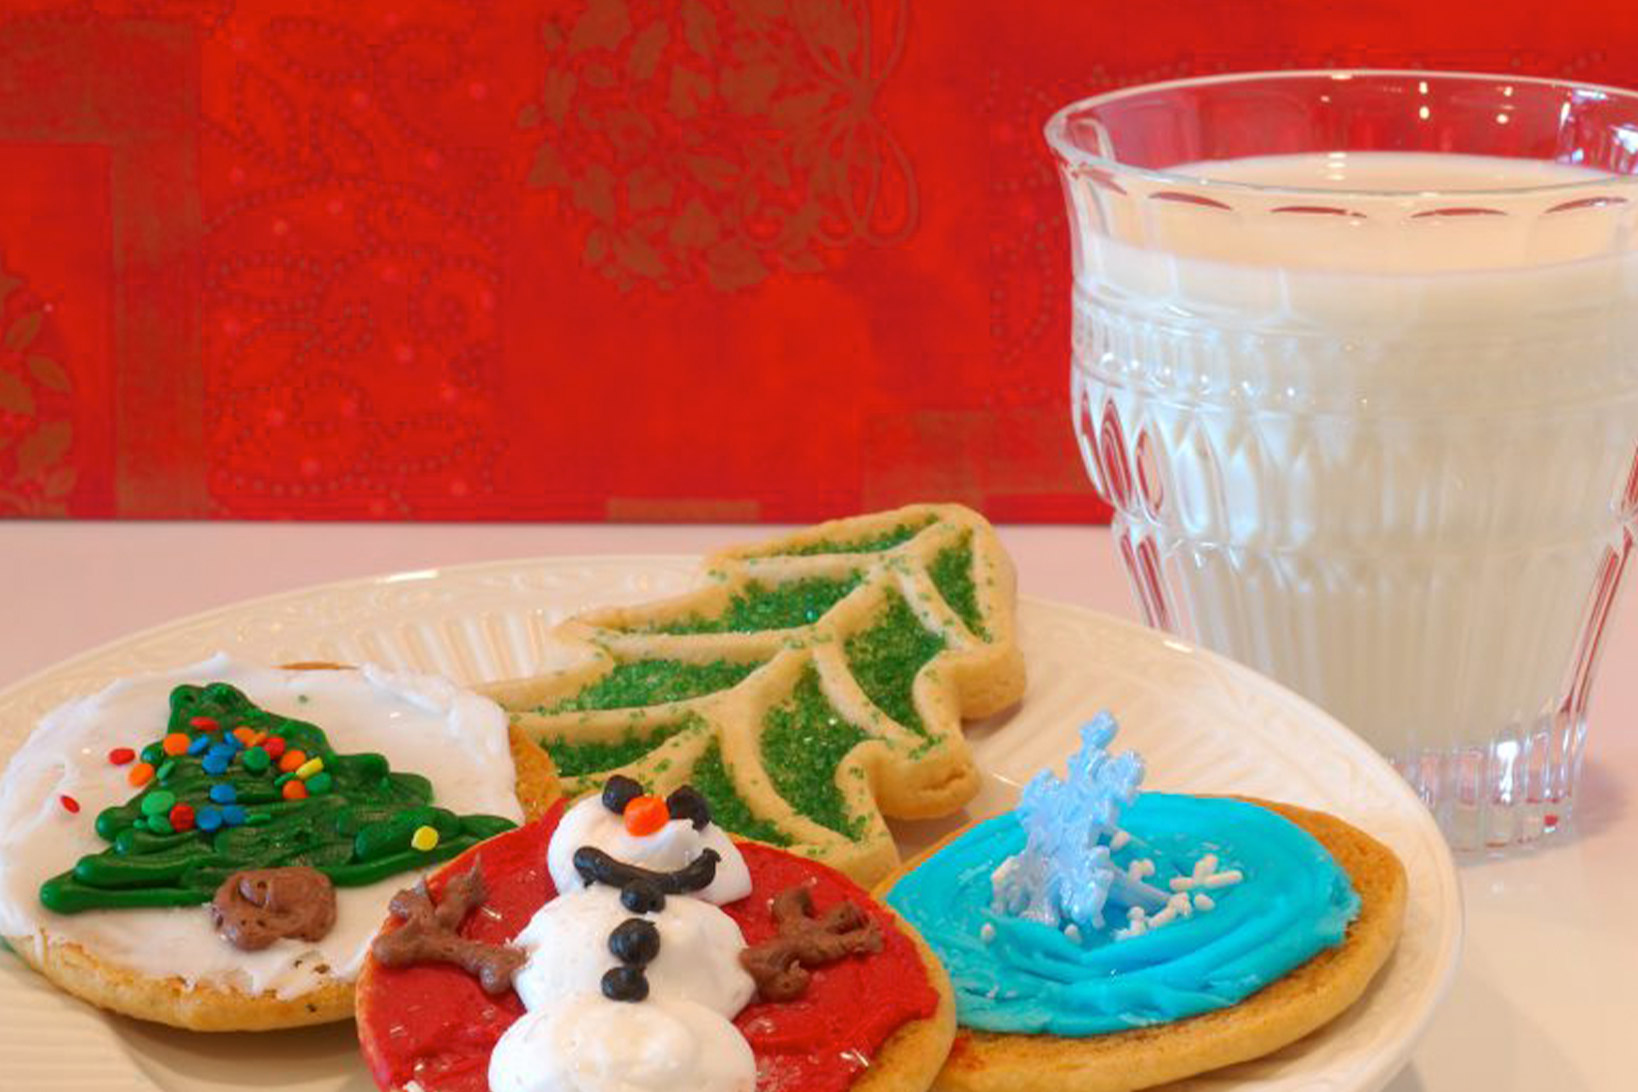 Four holiday-themed cookies on a white plate next to a glass of milk against a red backdrop.